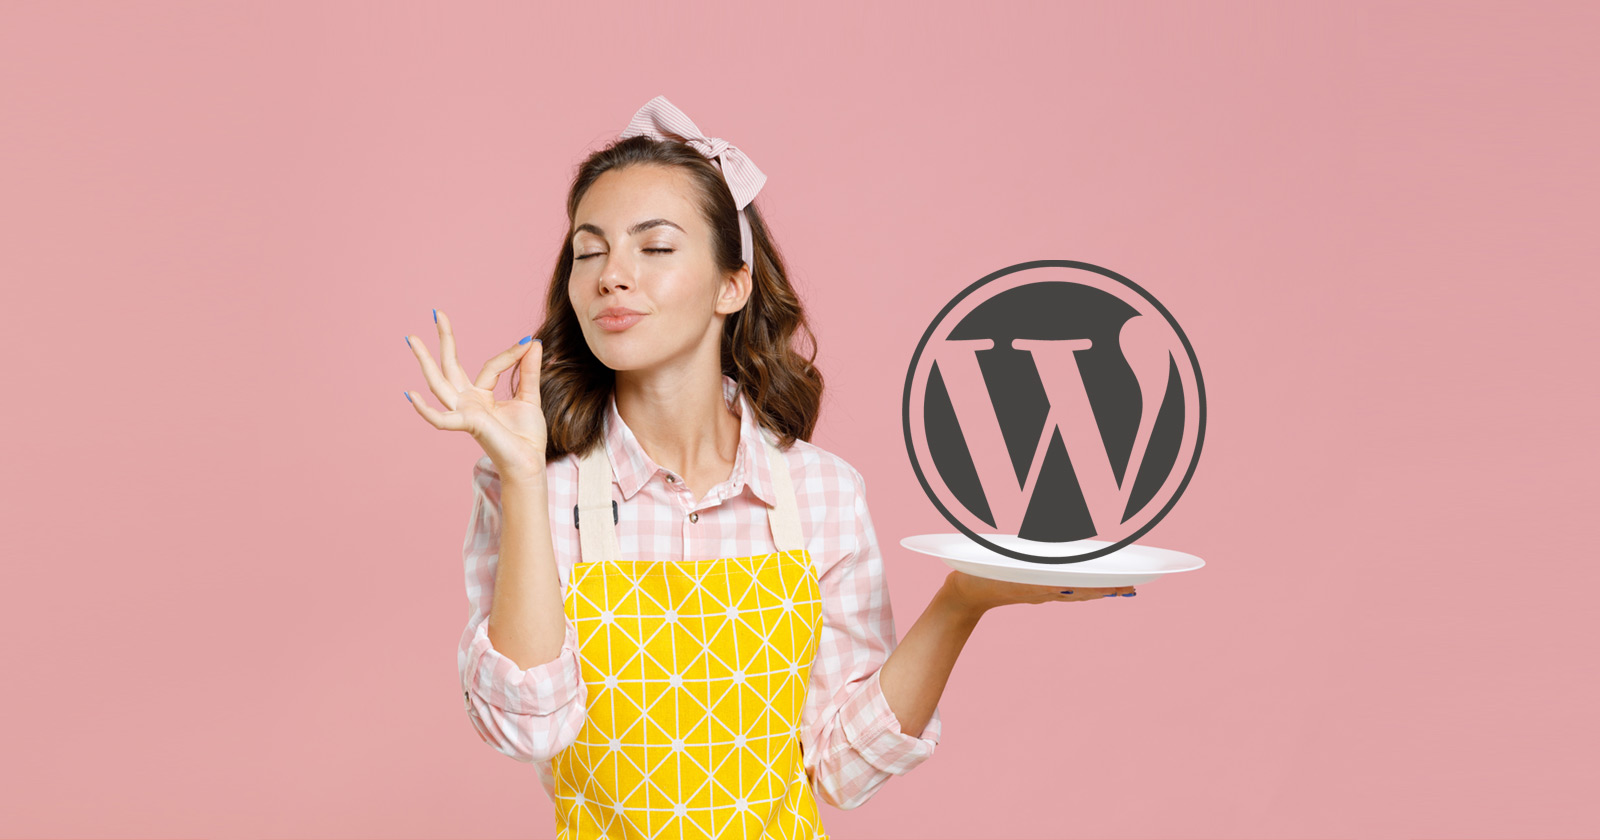 Image of a female chef with WordPress logo on a plate